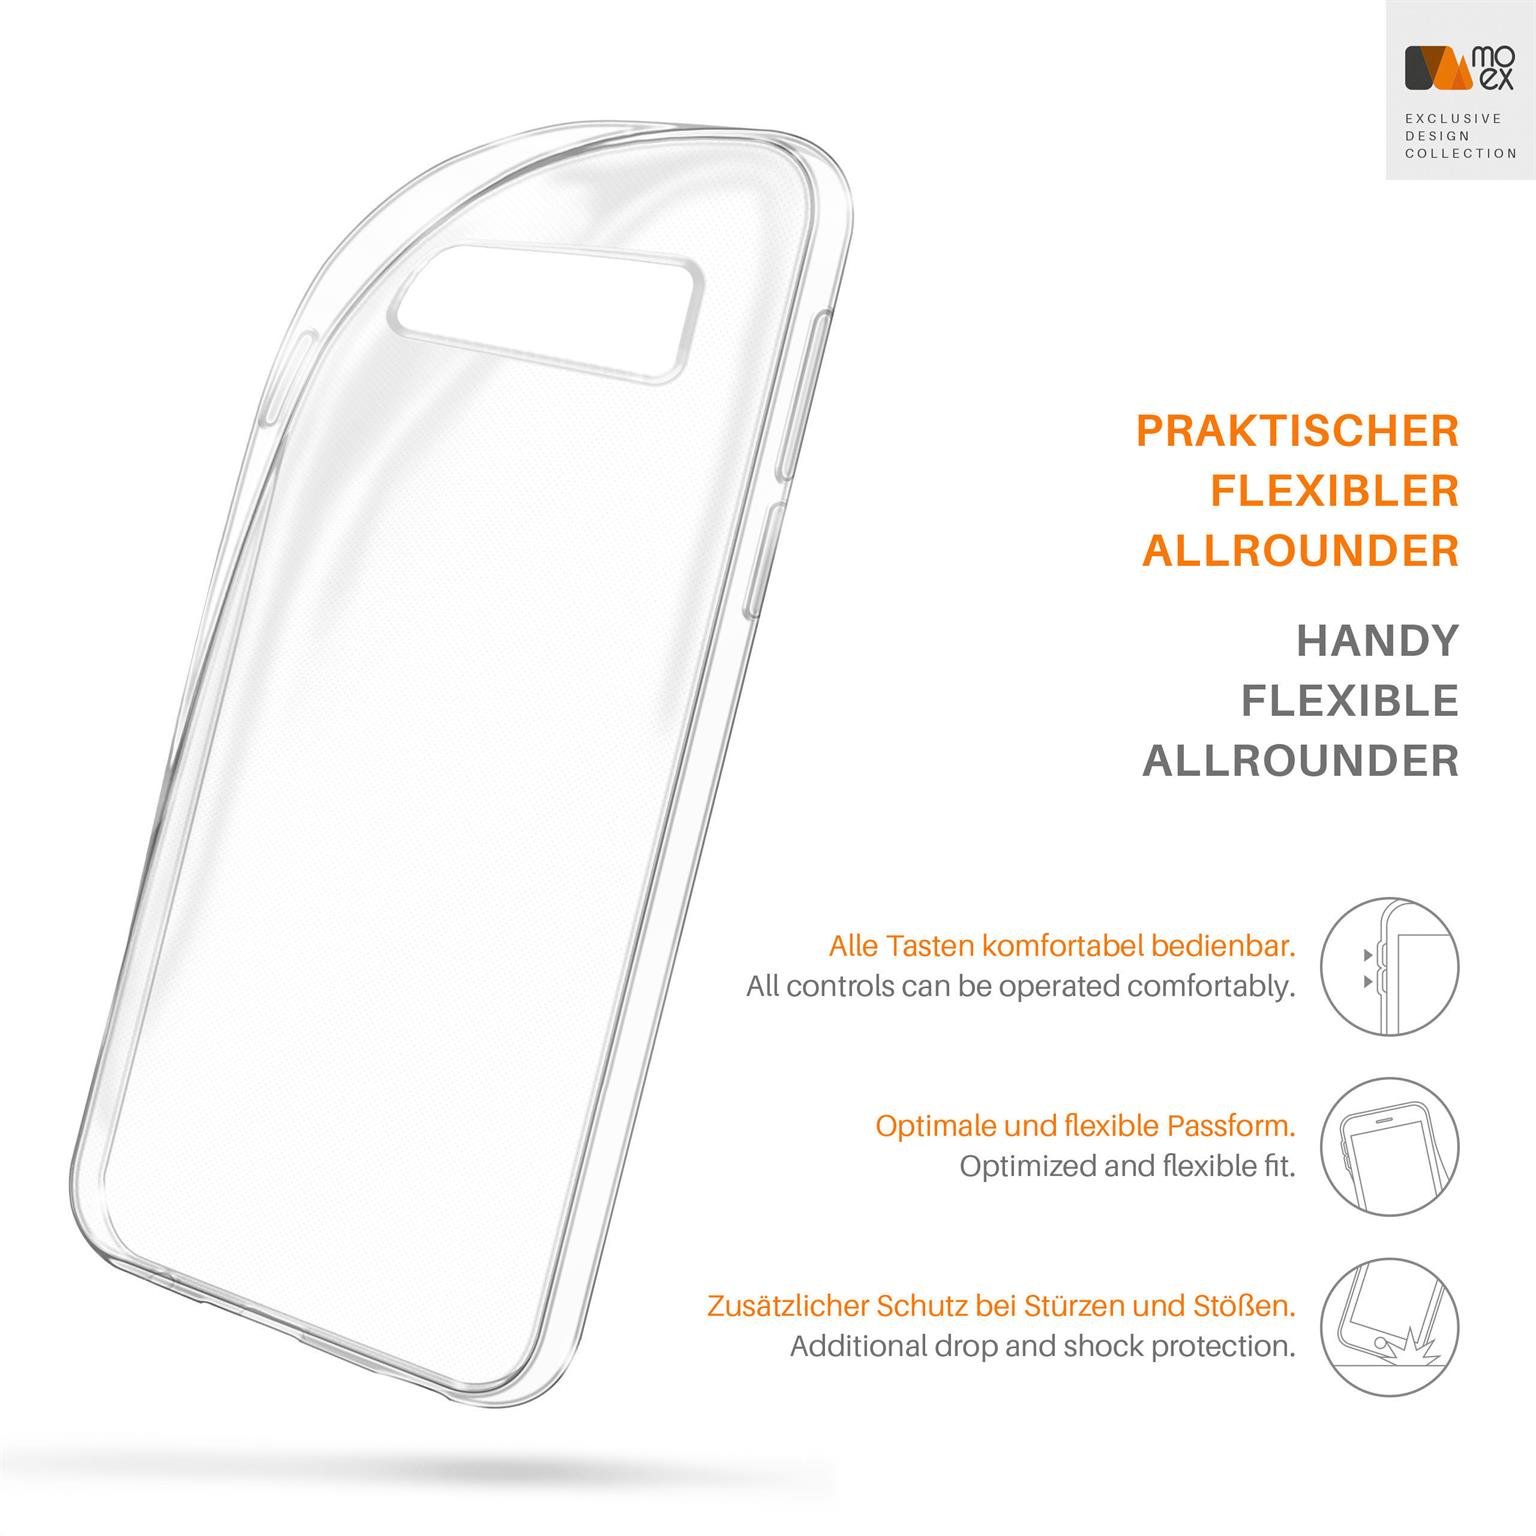 Backcover, MOEX Samsung, Note Aero Galaxy Case, 8, Crystal-Clear